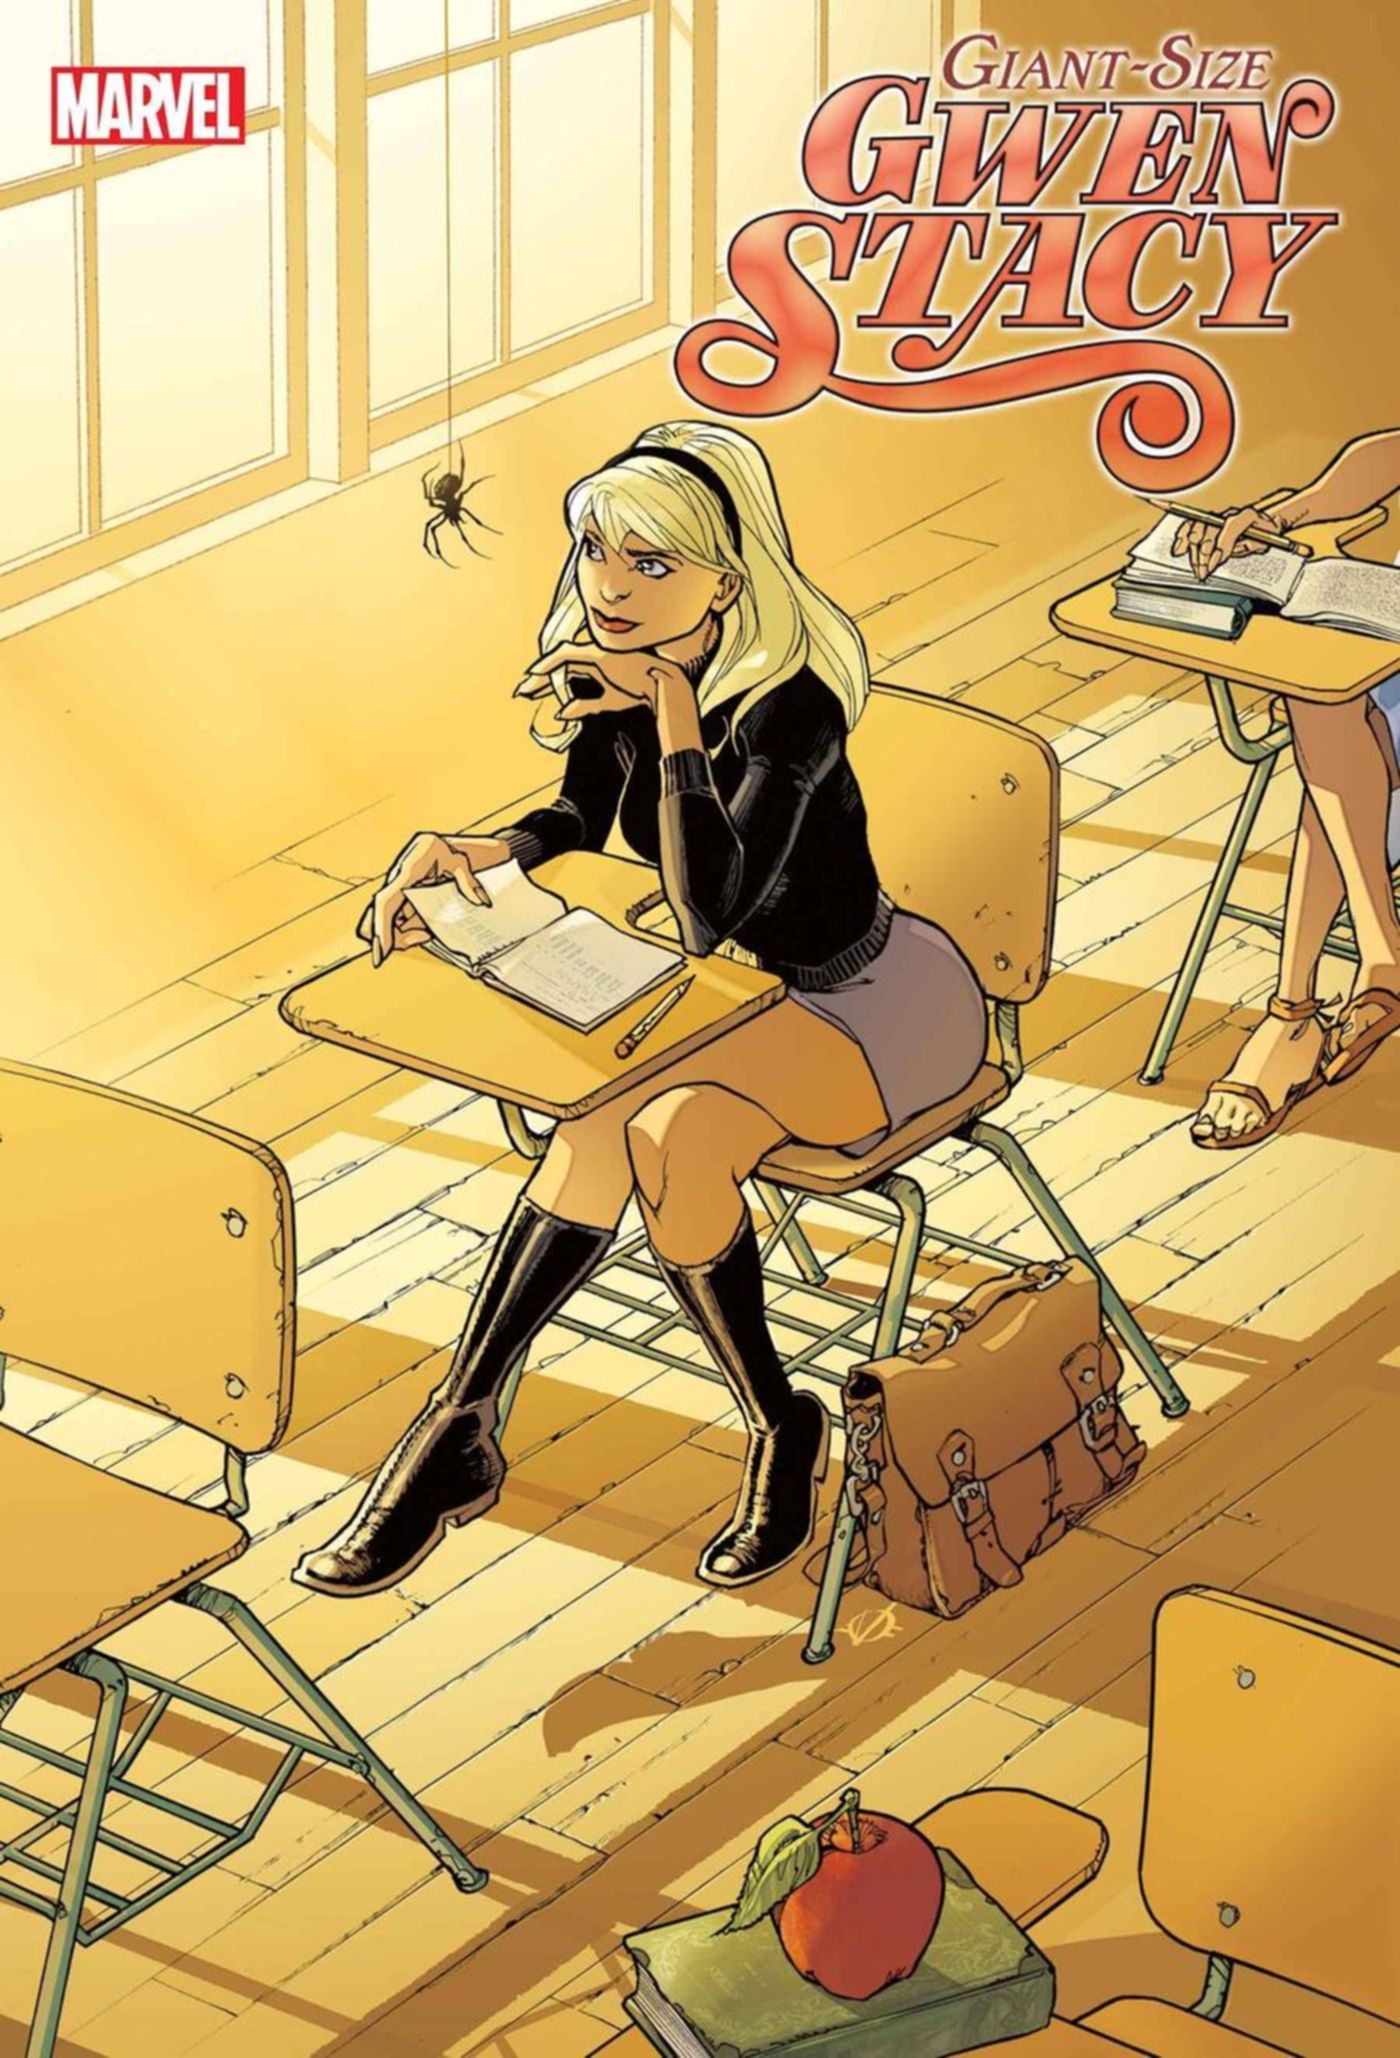 Gwen Stacy’s Story Gets Epic Conclusion in New ‘Giant-Sized’ Comic